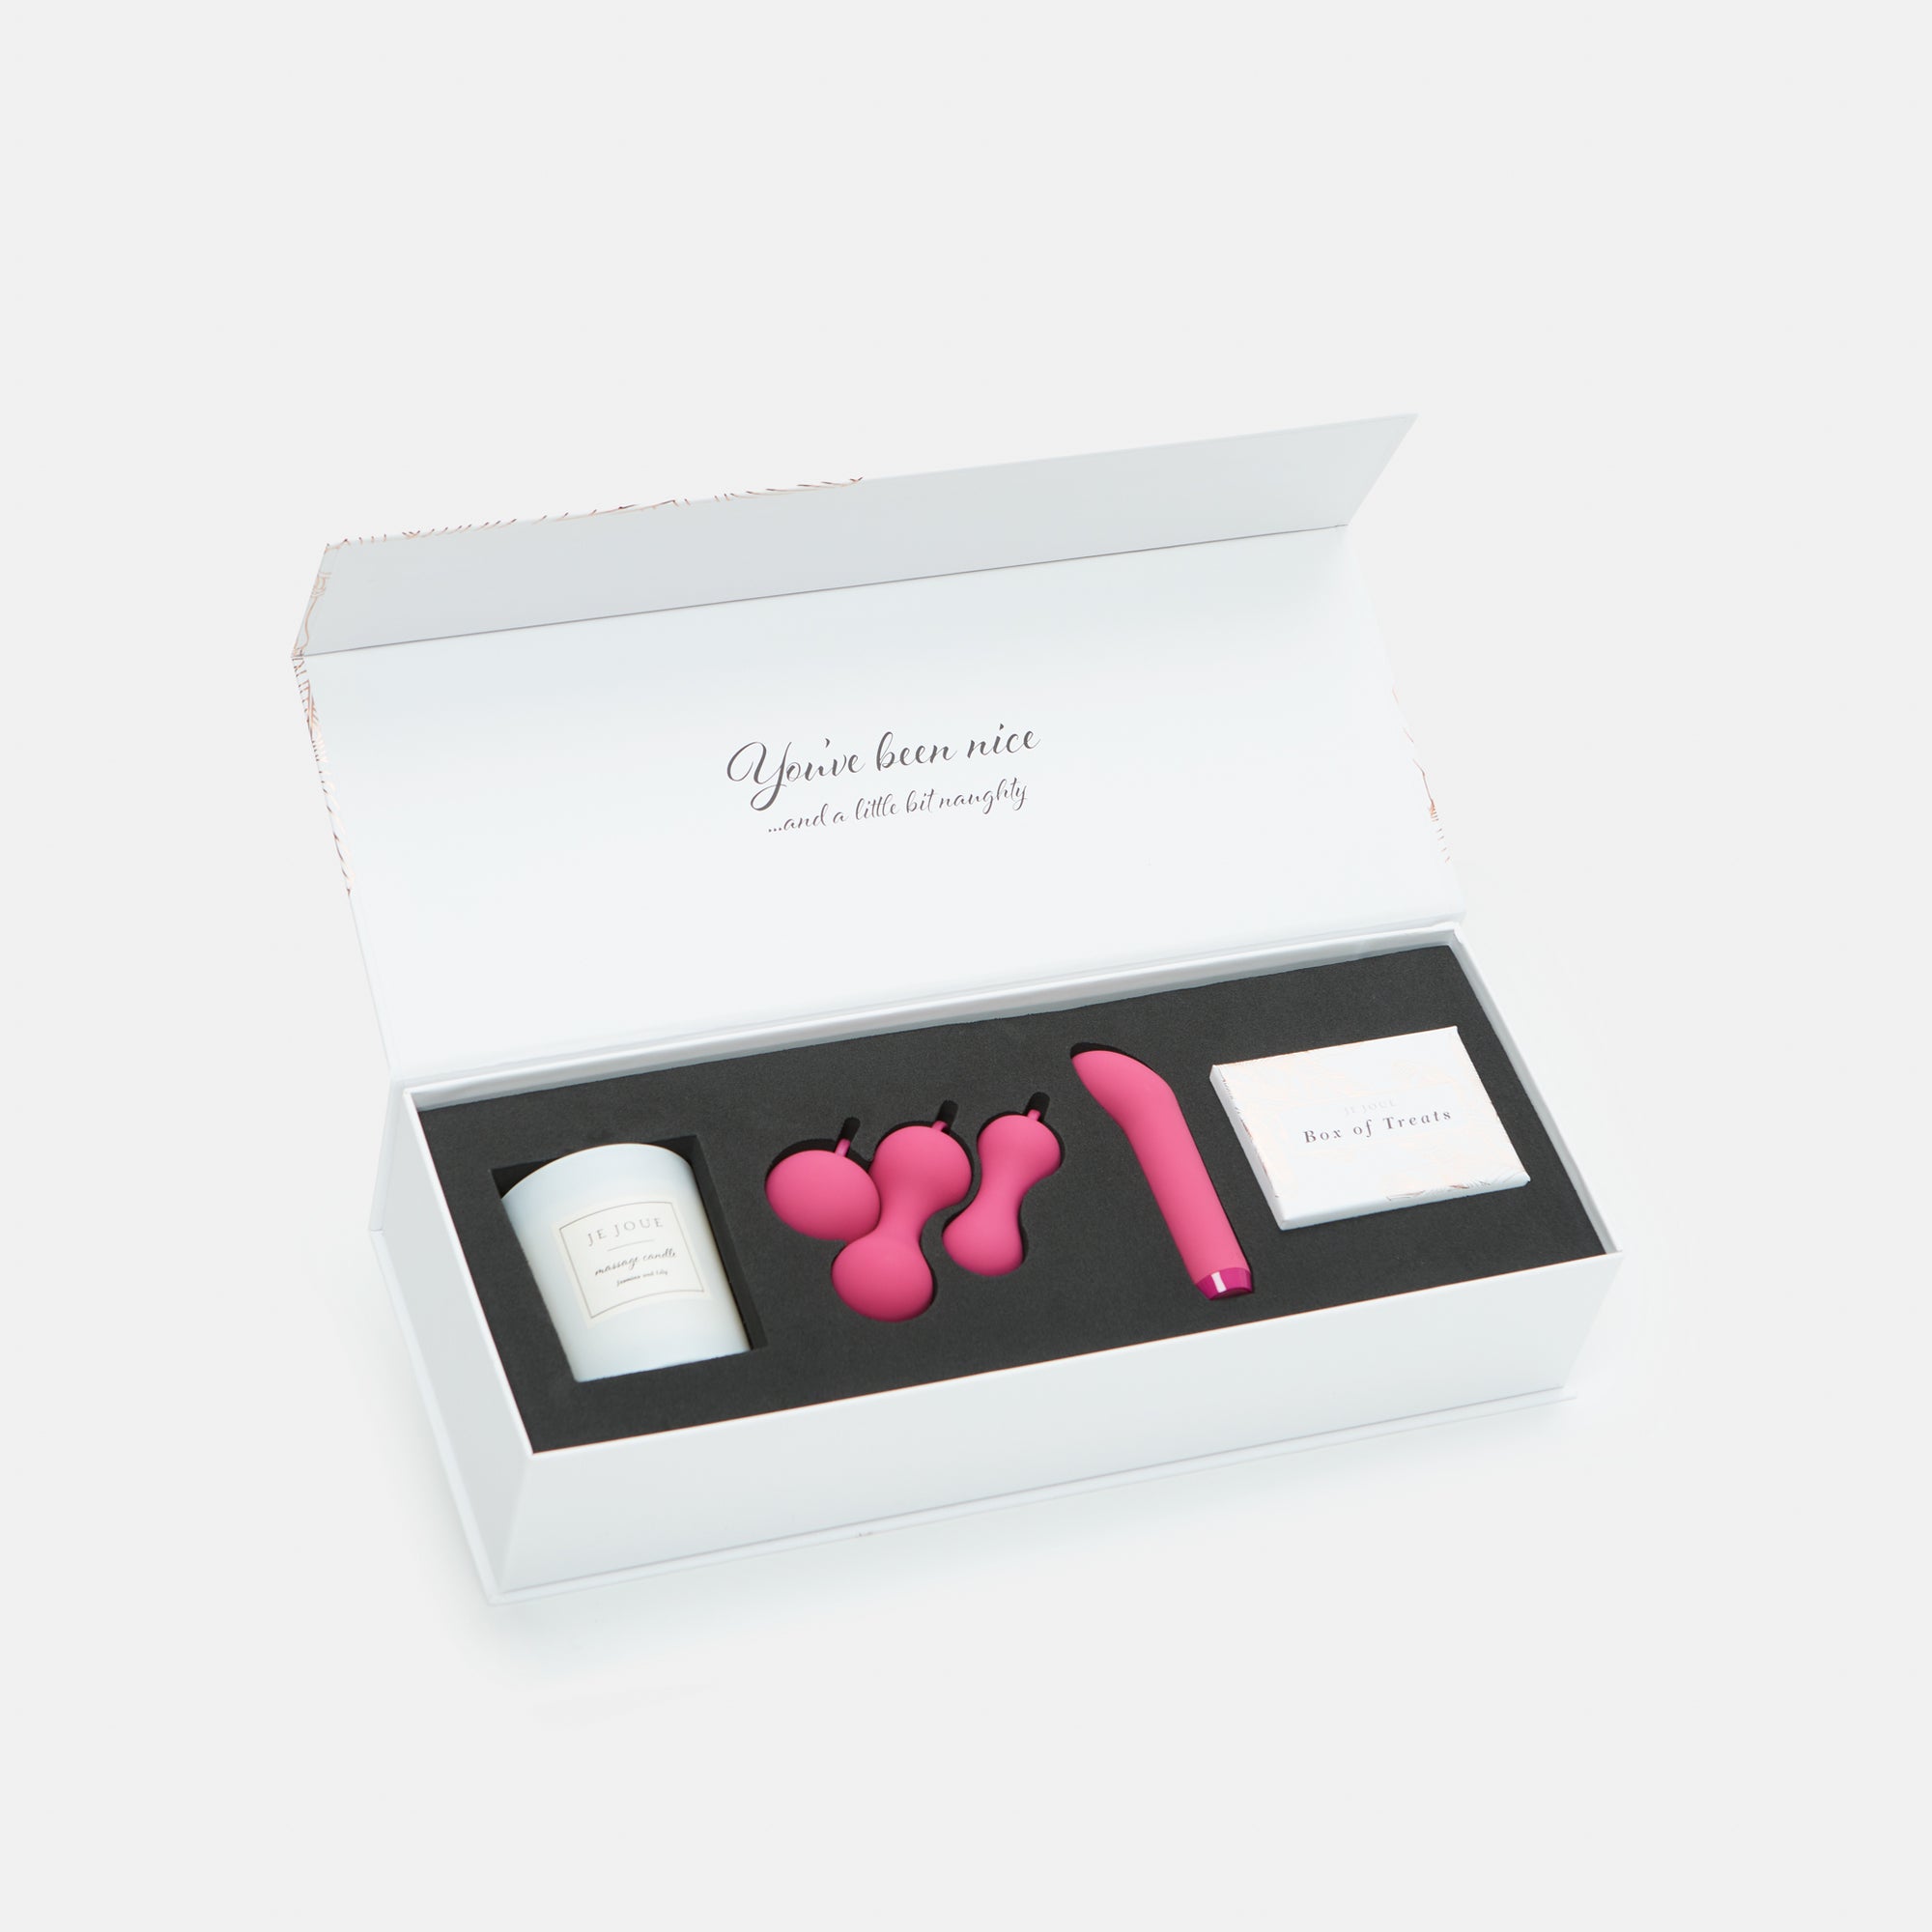 The Nice & Naughty Gift Set by Je Joue